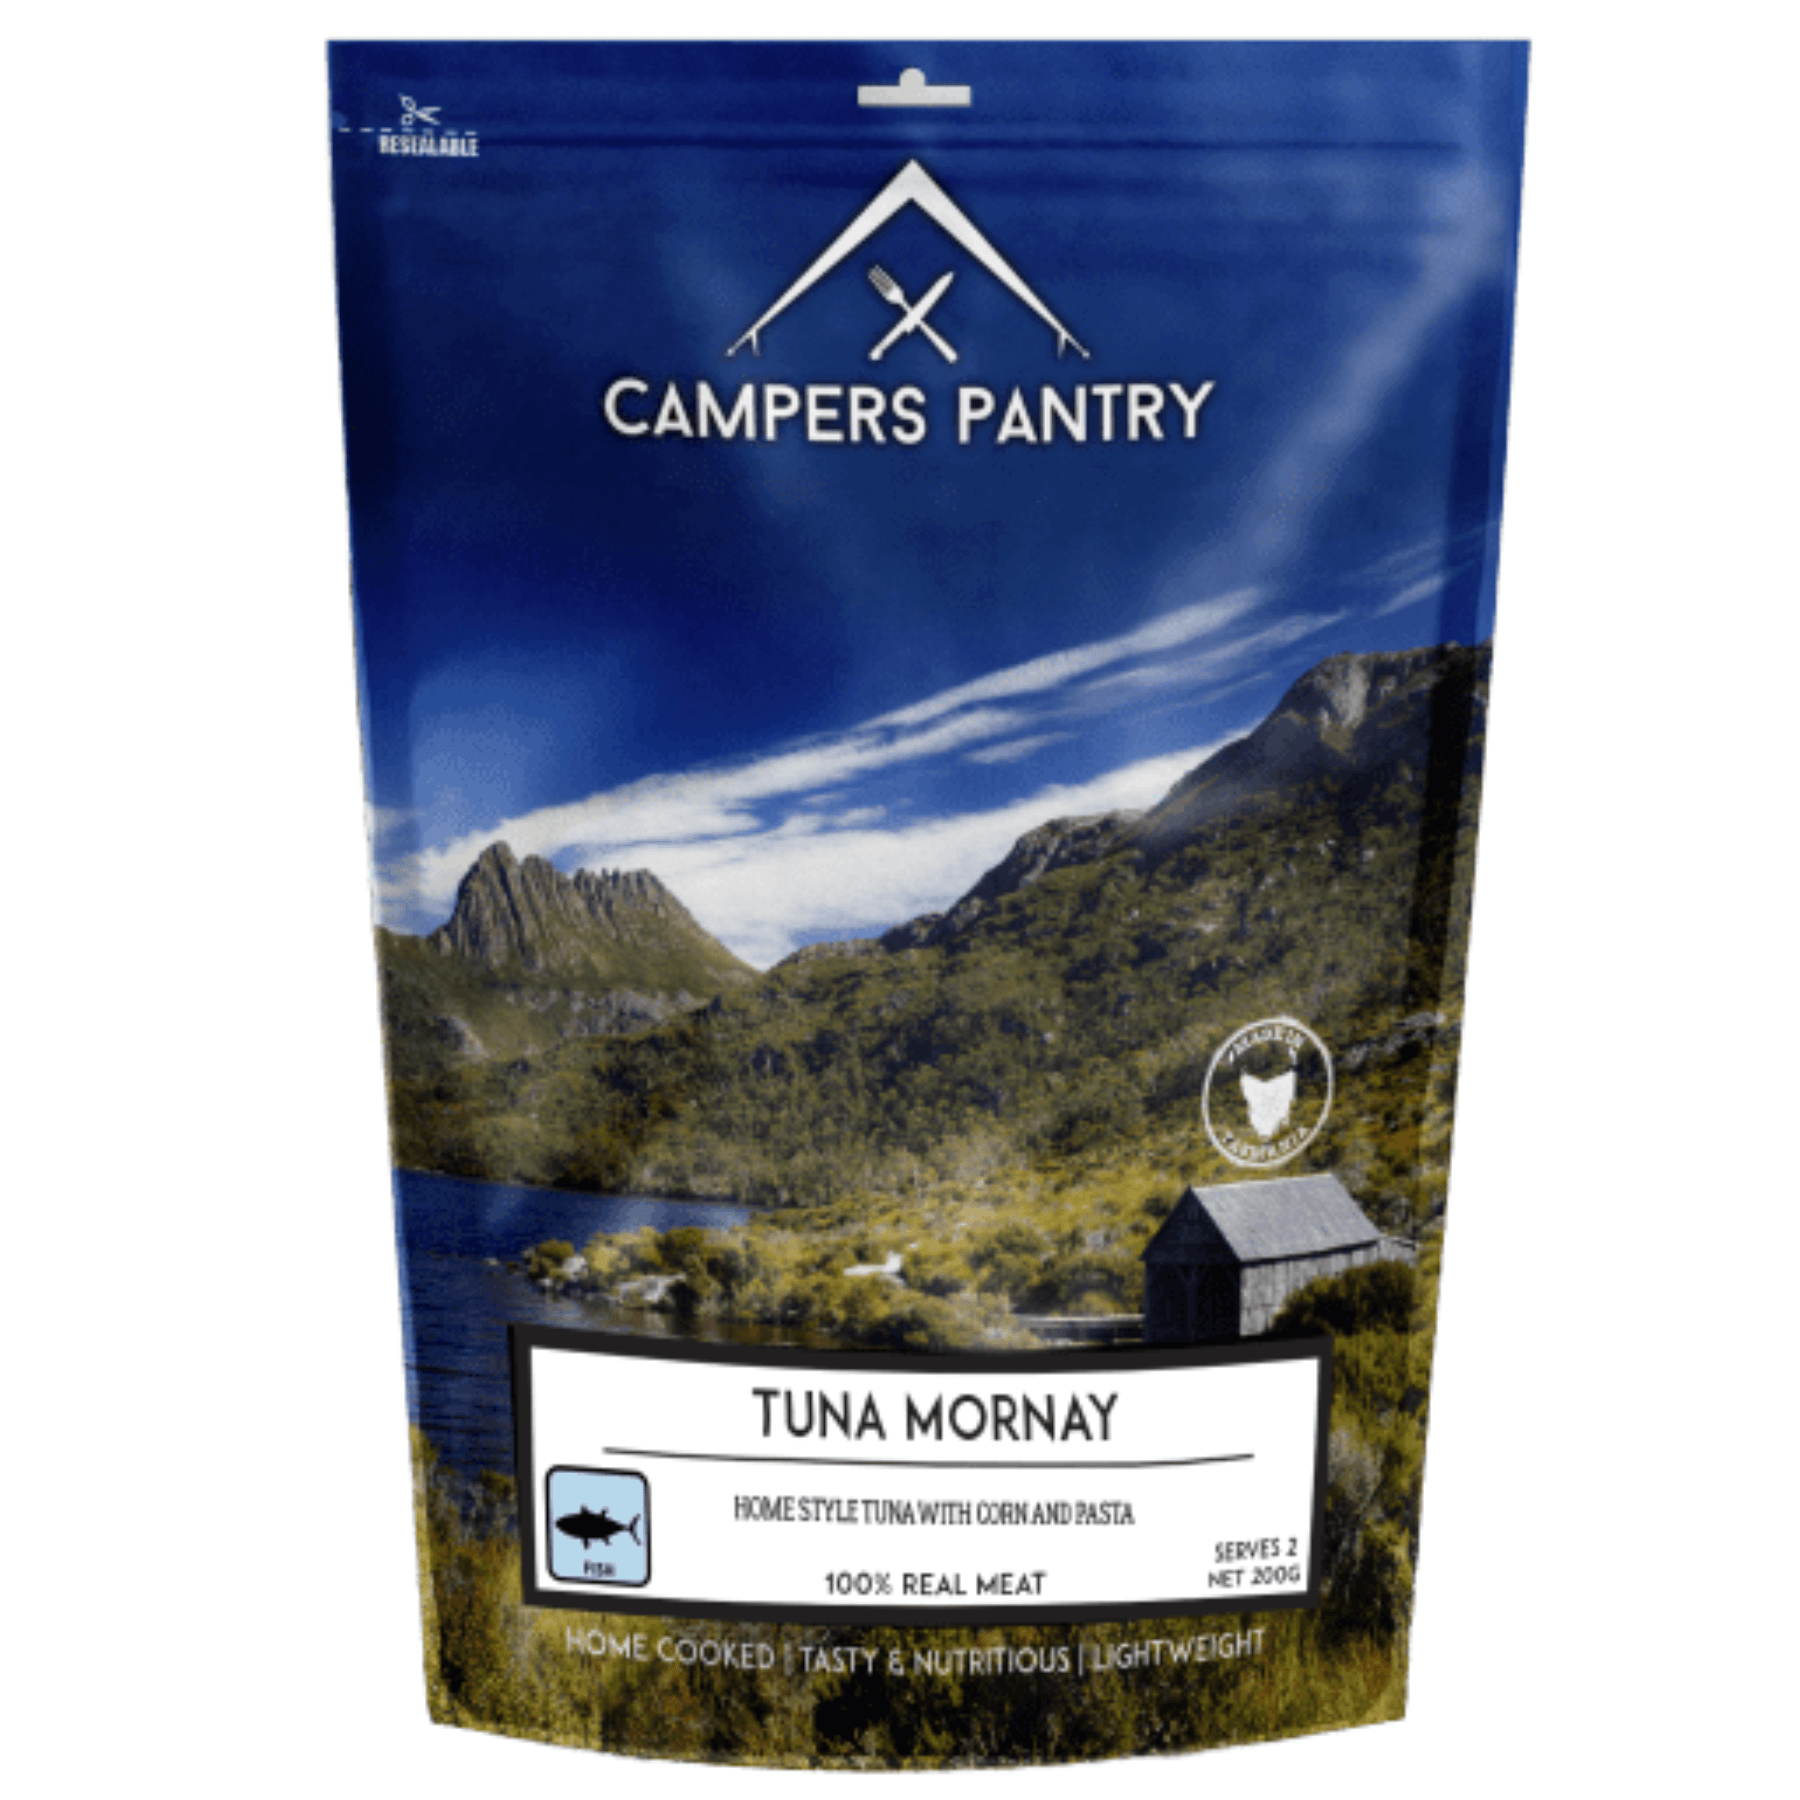 campers pantry Dehydrated Meals Single Serve / Tuna Mornay Freeze-dried Dinner Meals CPTM10017